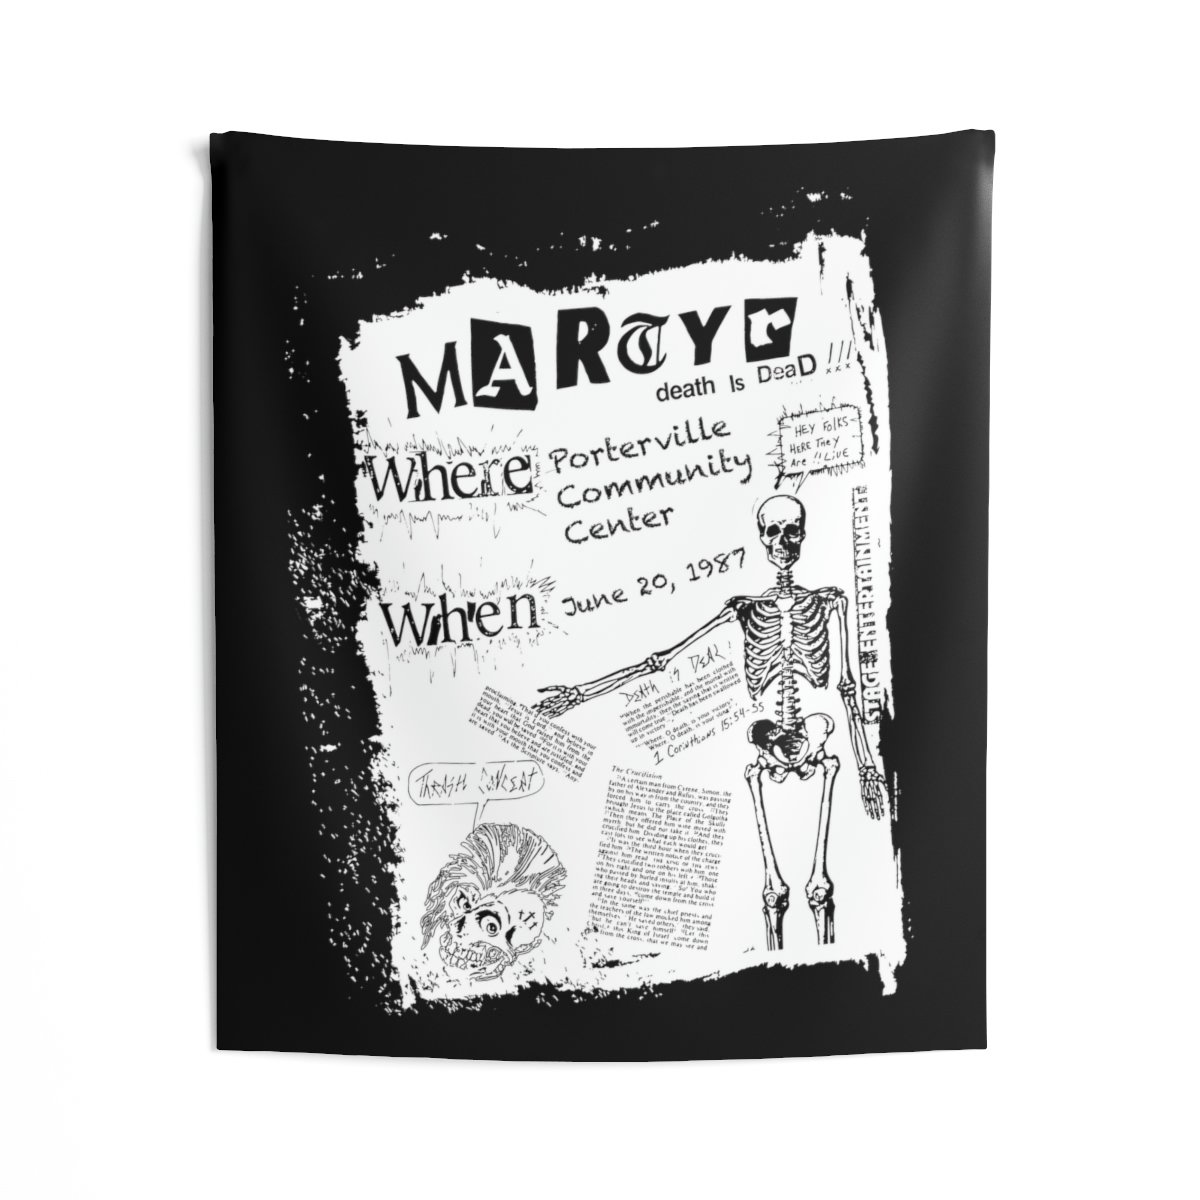 Martyr 1987 Flyer Indoor Wall Tapestries